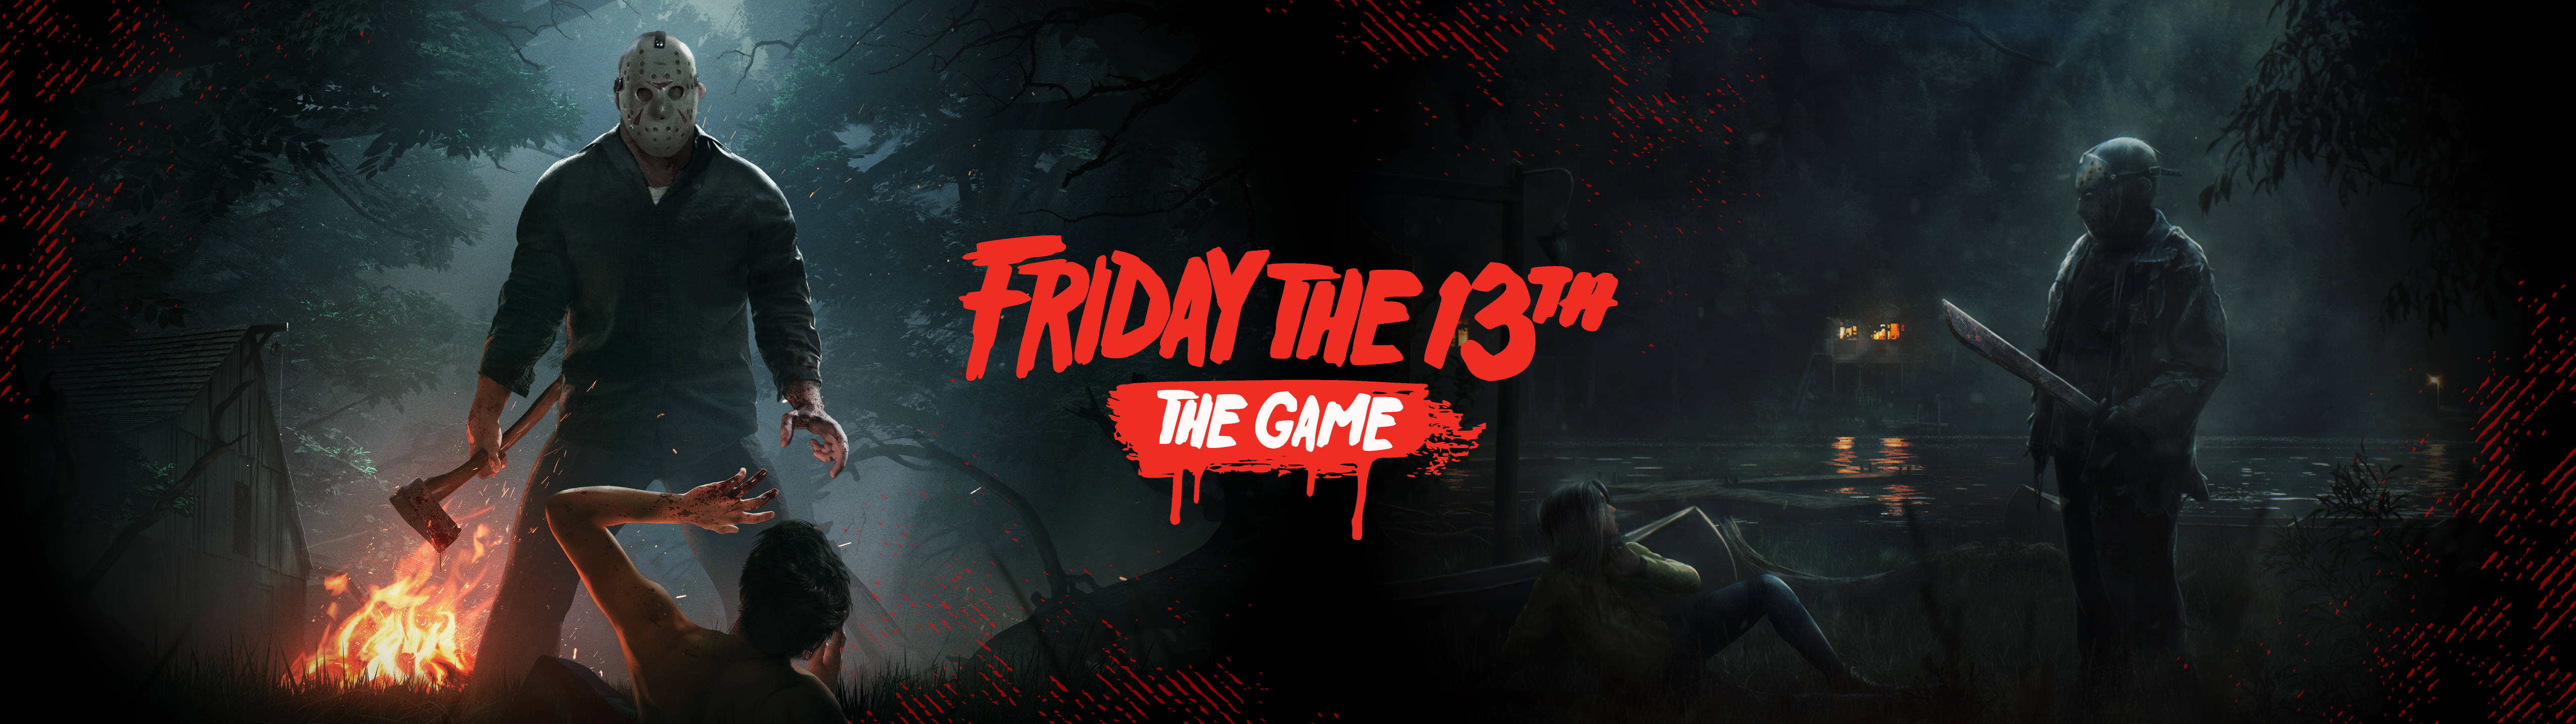 Friday The 13th 5120x1440 Gaming Background